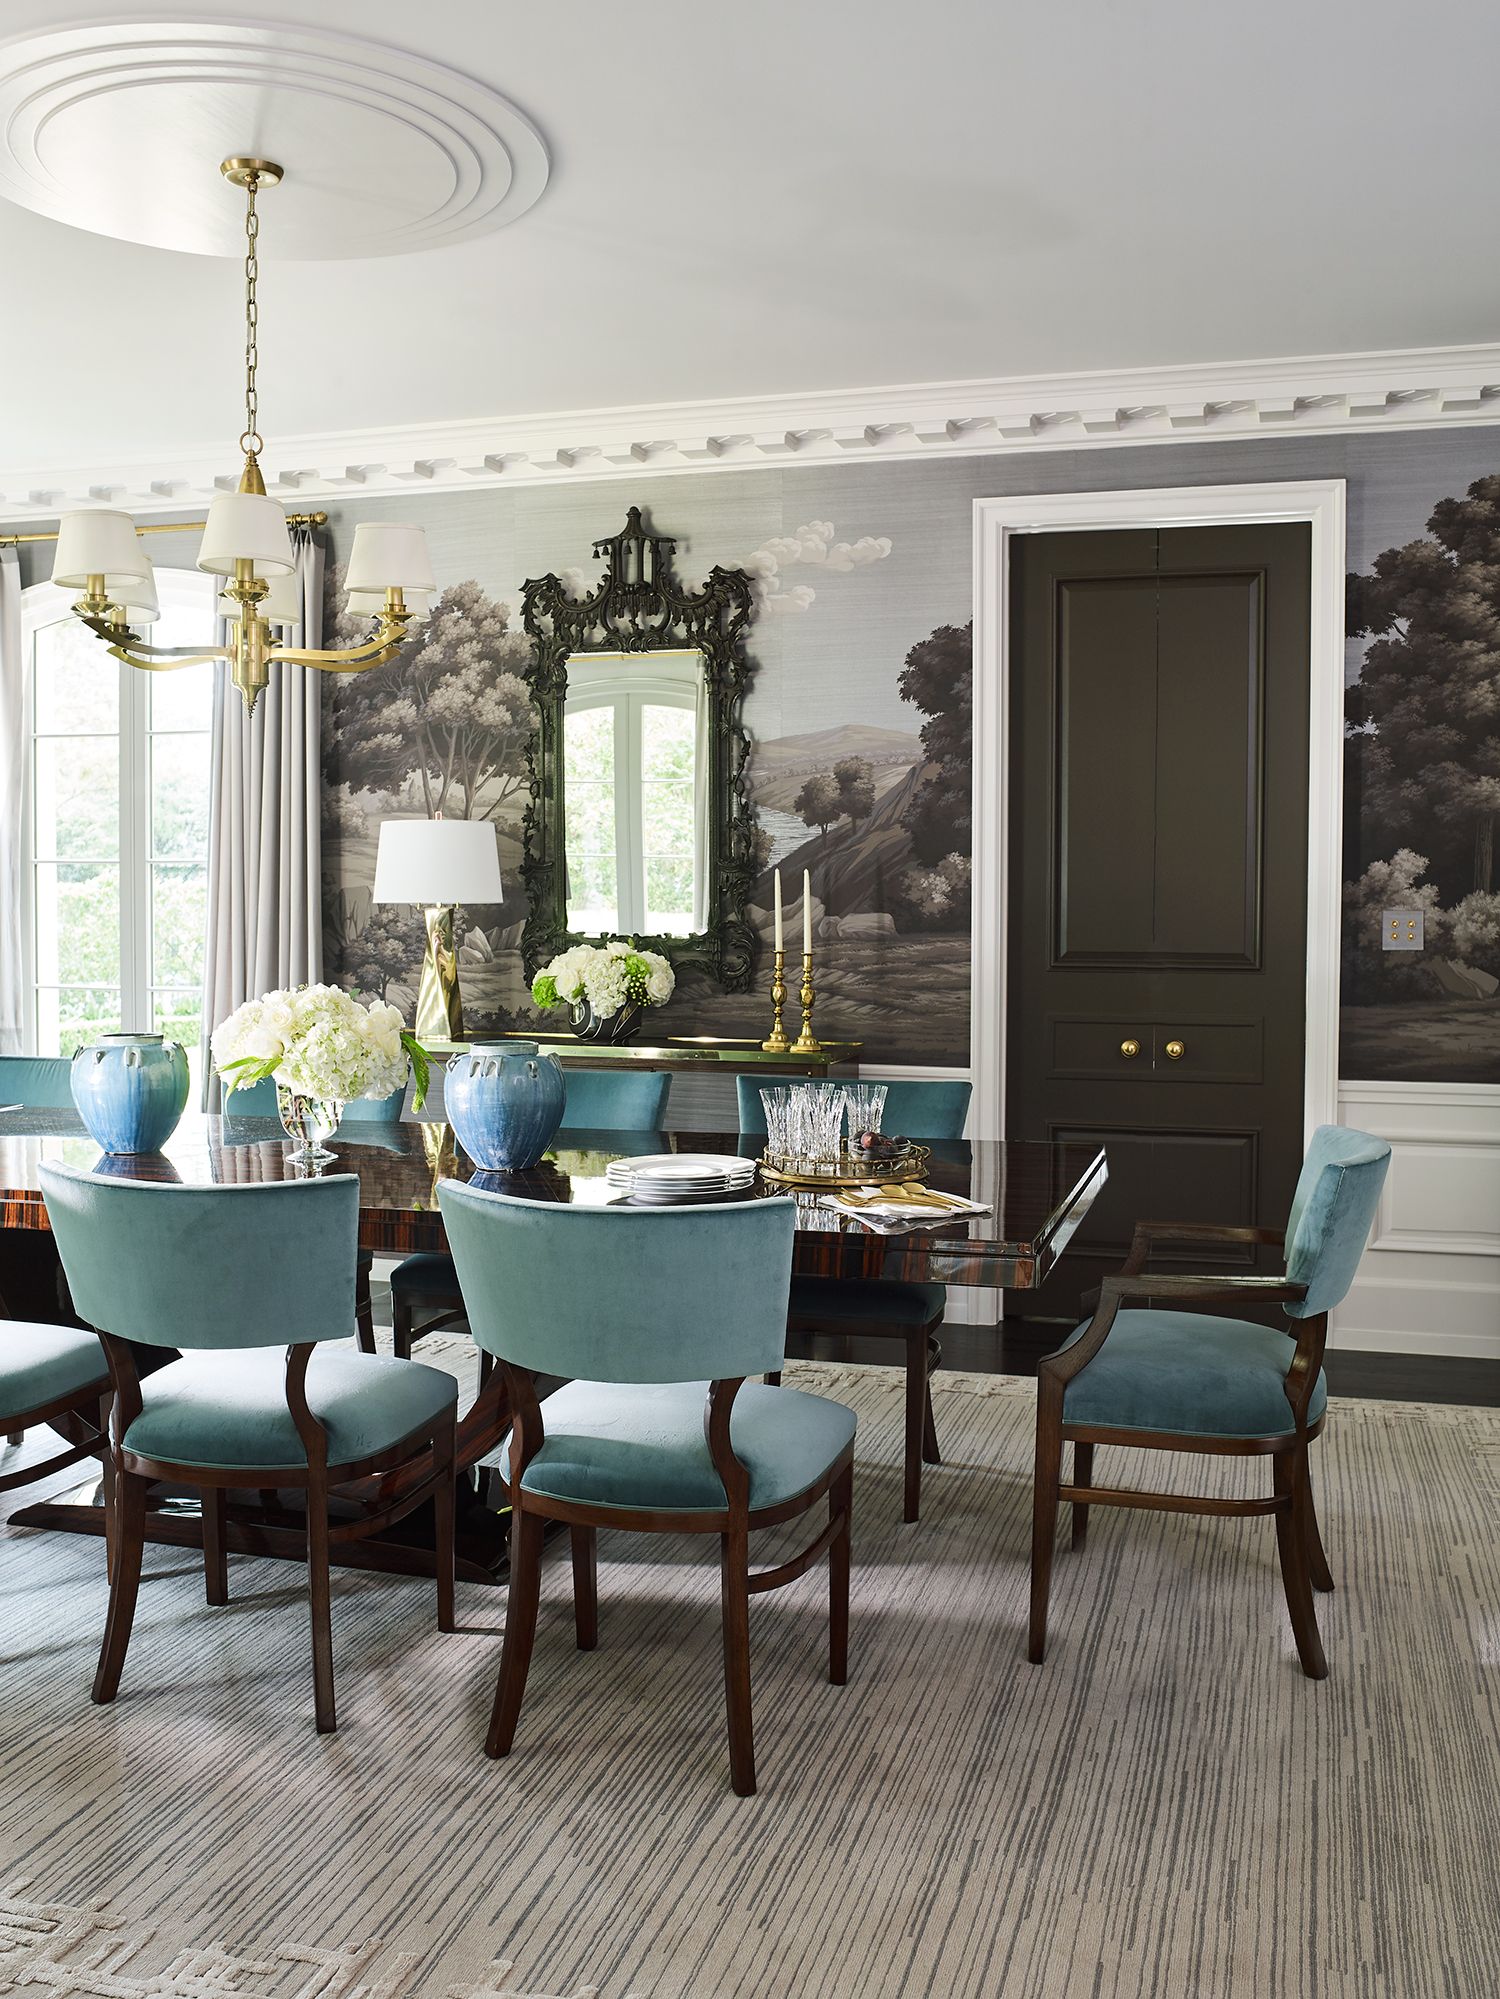 The Design Trends That Are In And Out In 2020 What Decorating